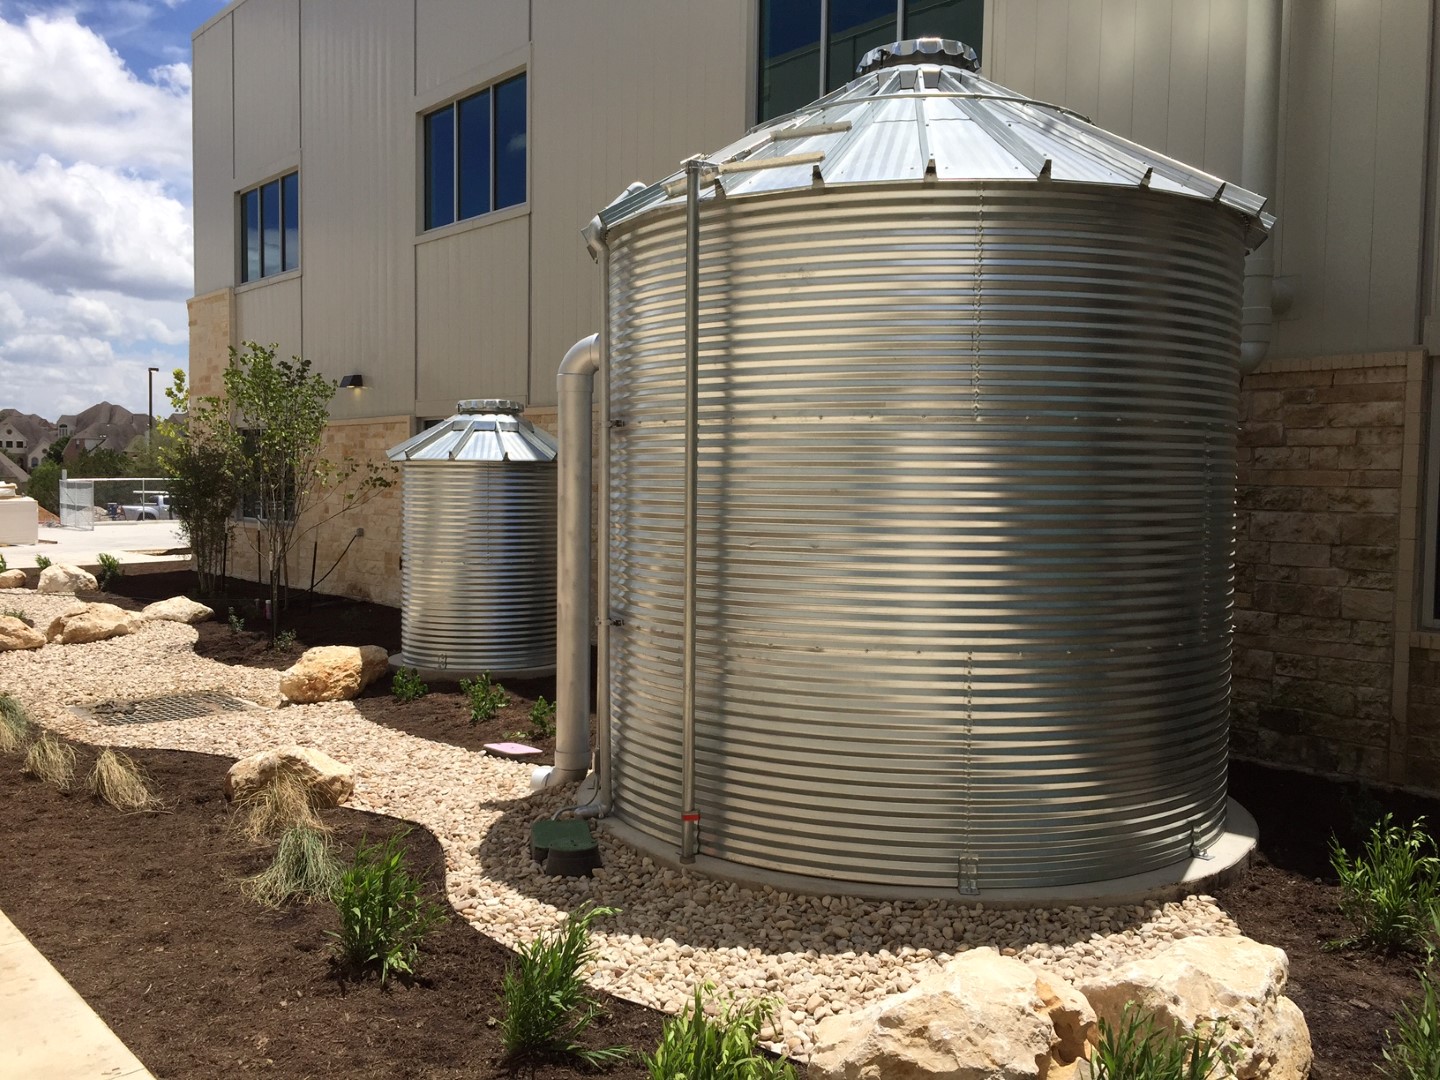 View of 10,000-gallon metal cistern and pump enclosure for irrigation system.